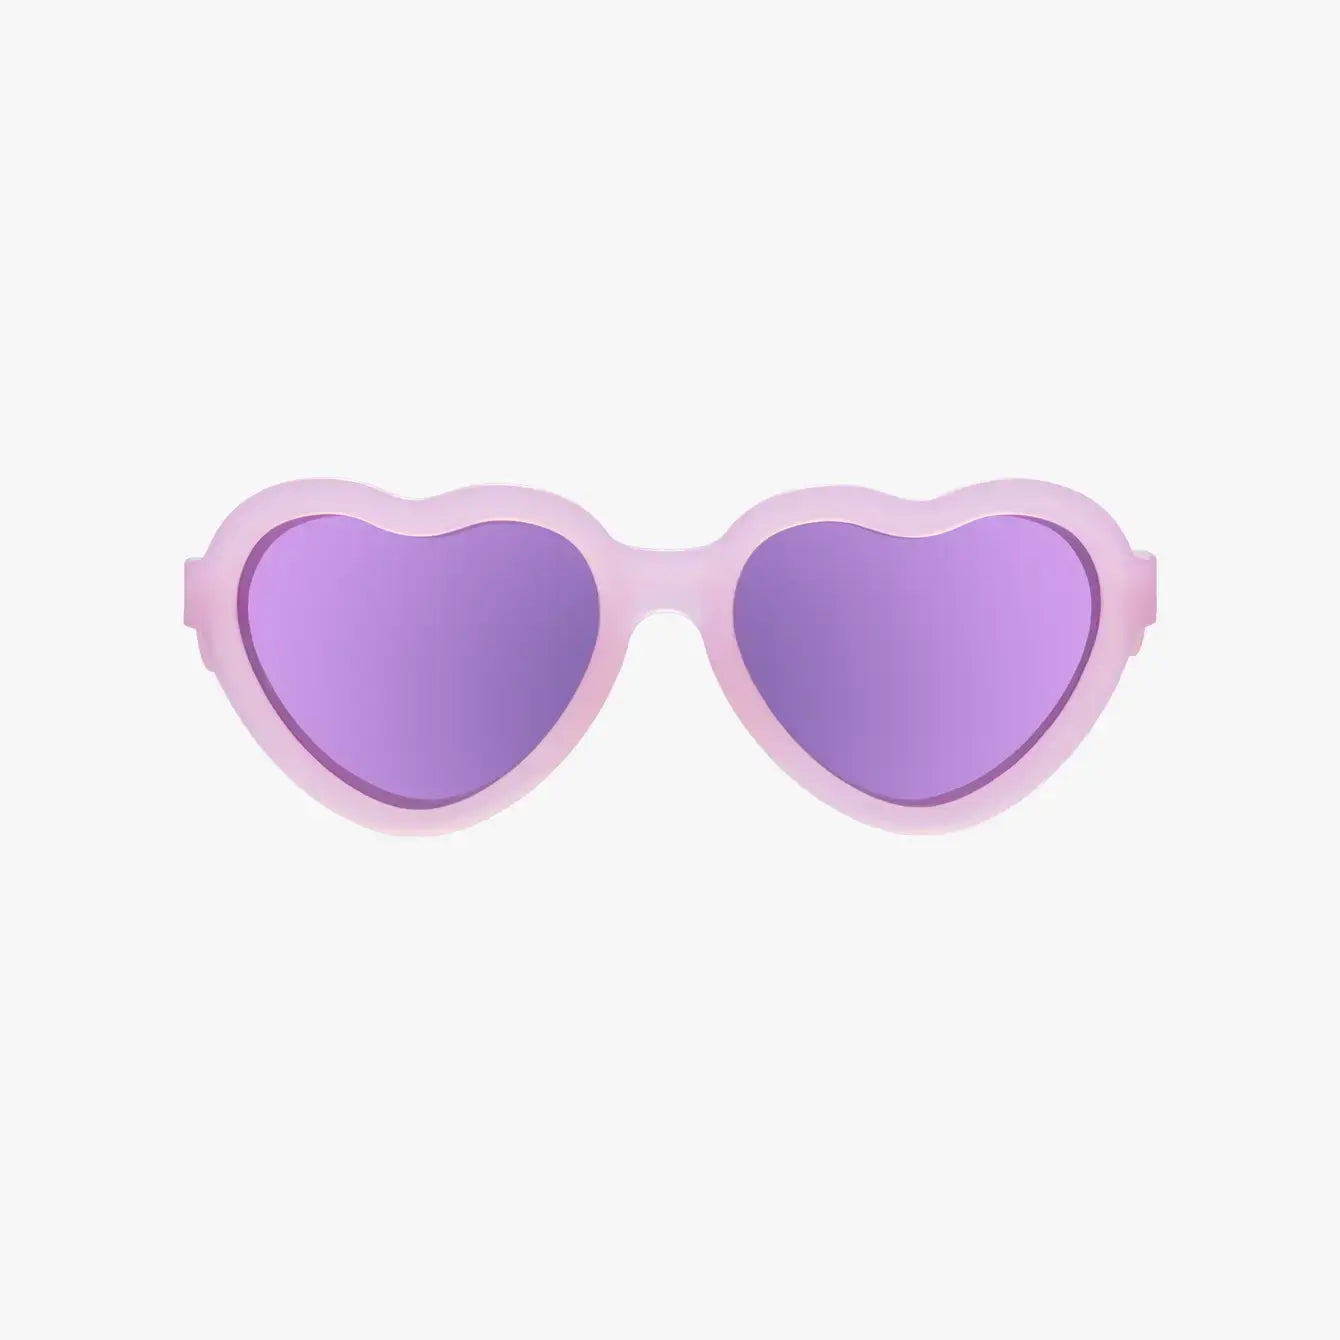 Babiators - Polarized Heart Sunglasses: Ages 0-2 / Frosted Pink